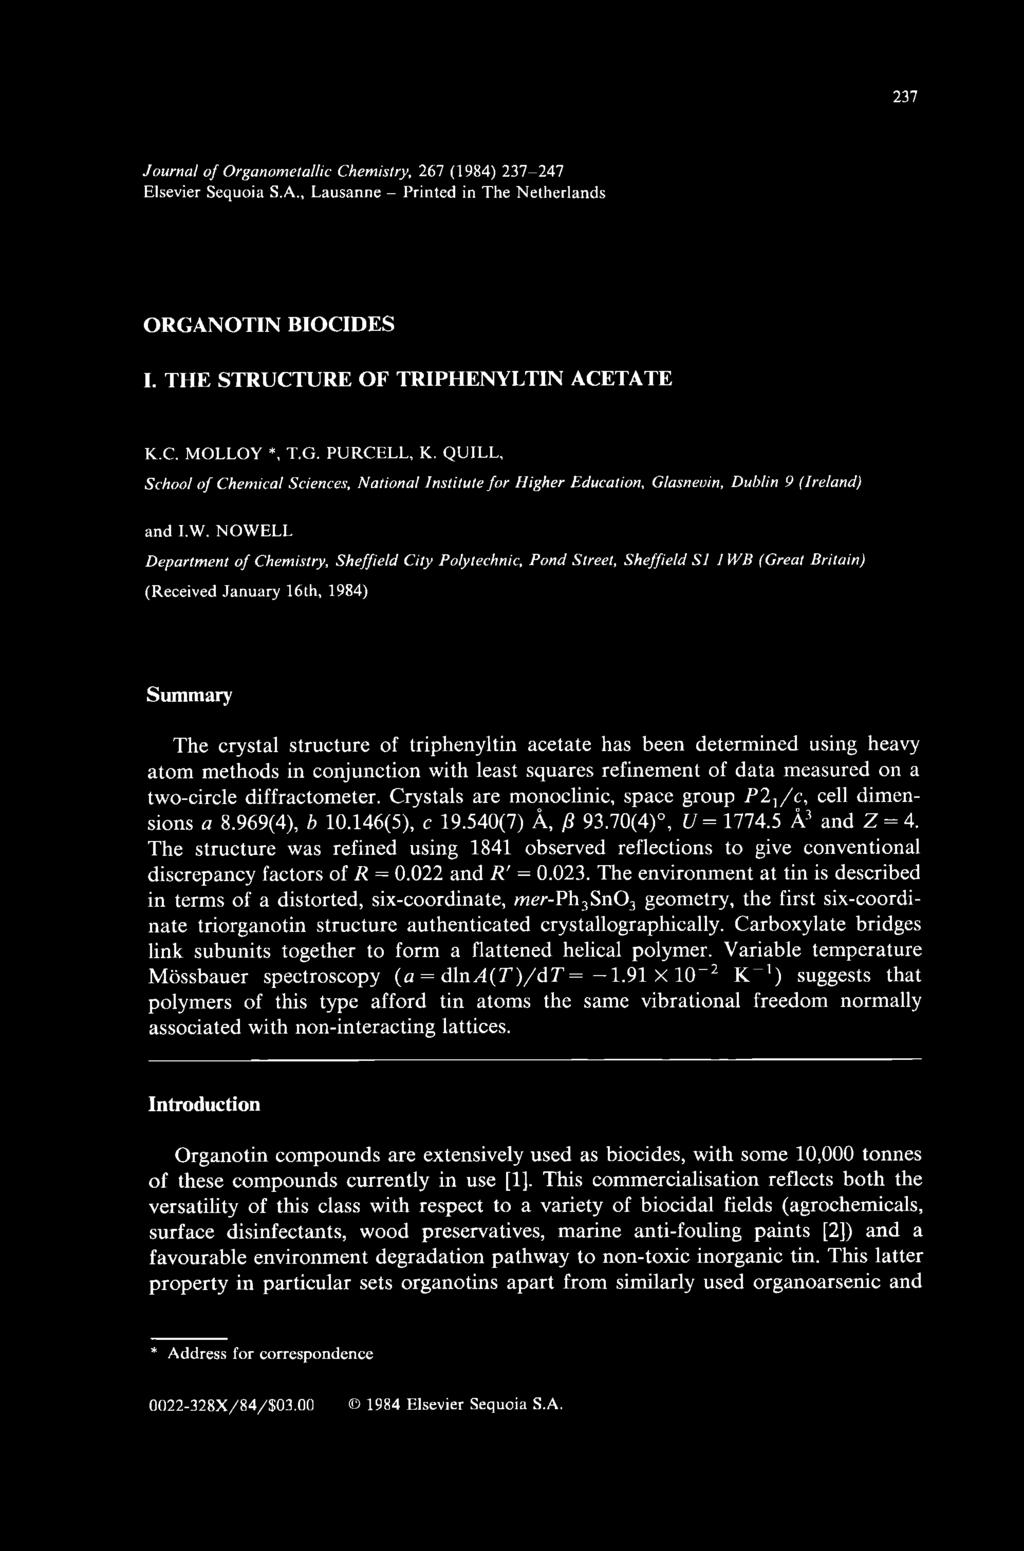 N O W E L L Department o f Chemistry, Sheffield City Polytechnic, Pond Street, Sheffield S I I WB (Great Britain) (Received January 16th, 1984) Summary The crystal structure of triphenyltin acetate